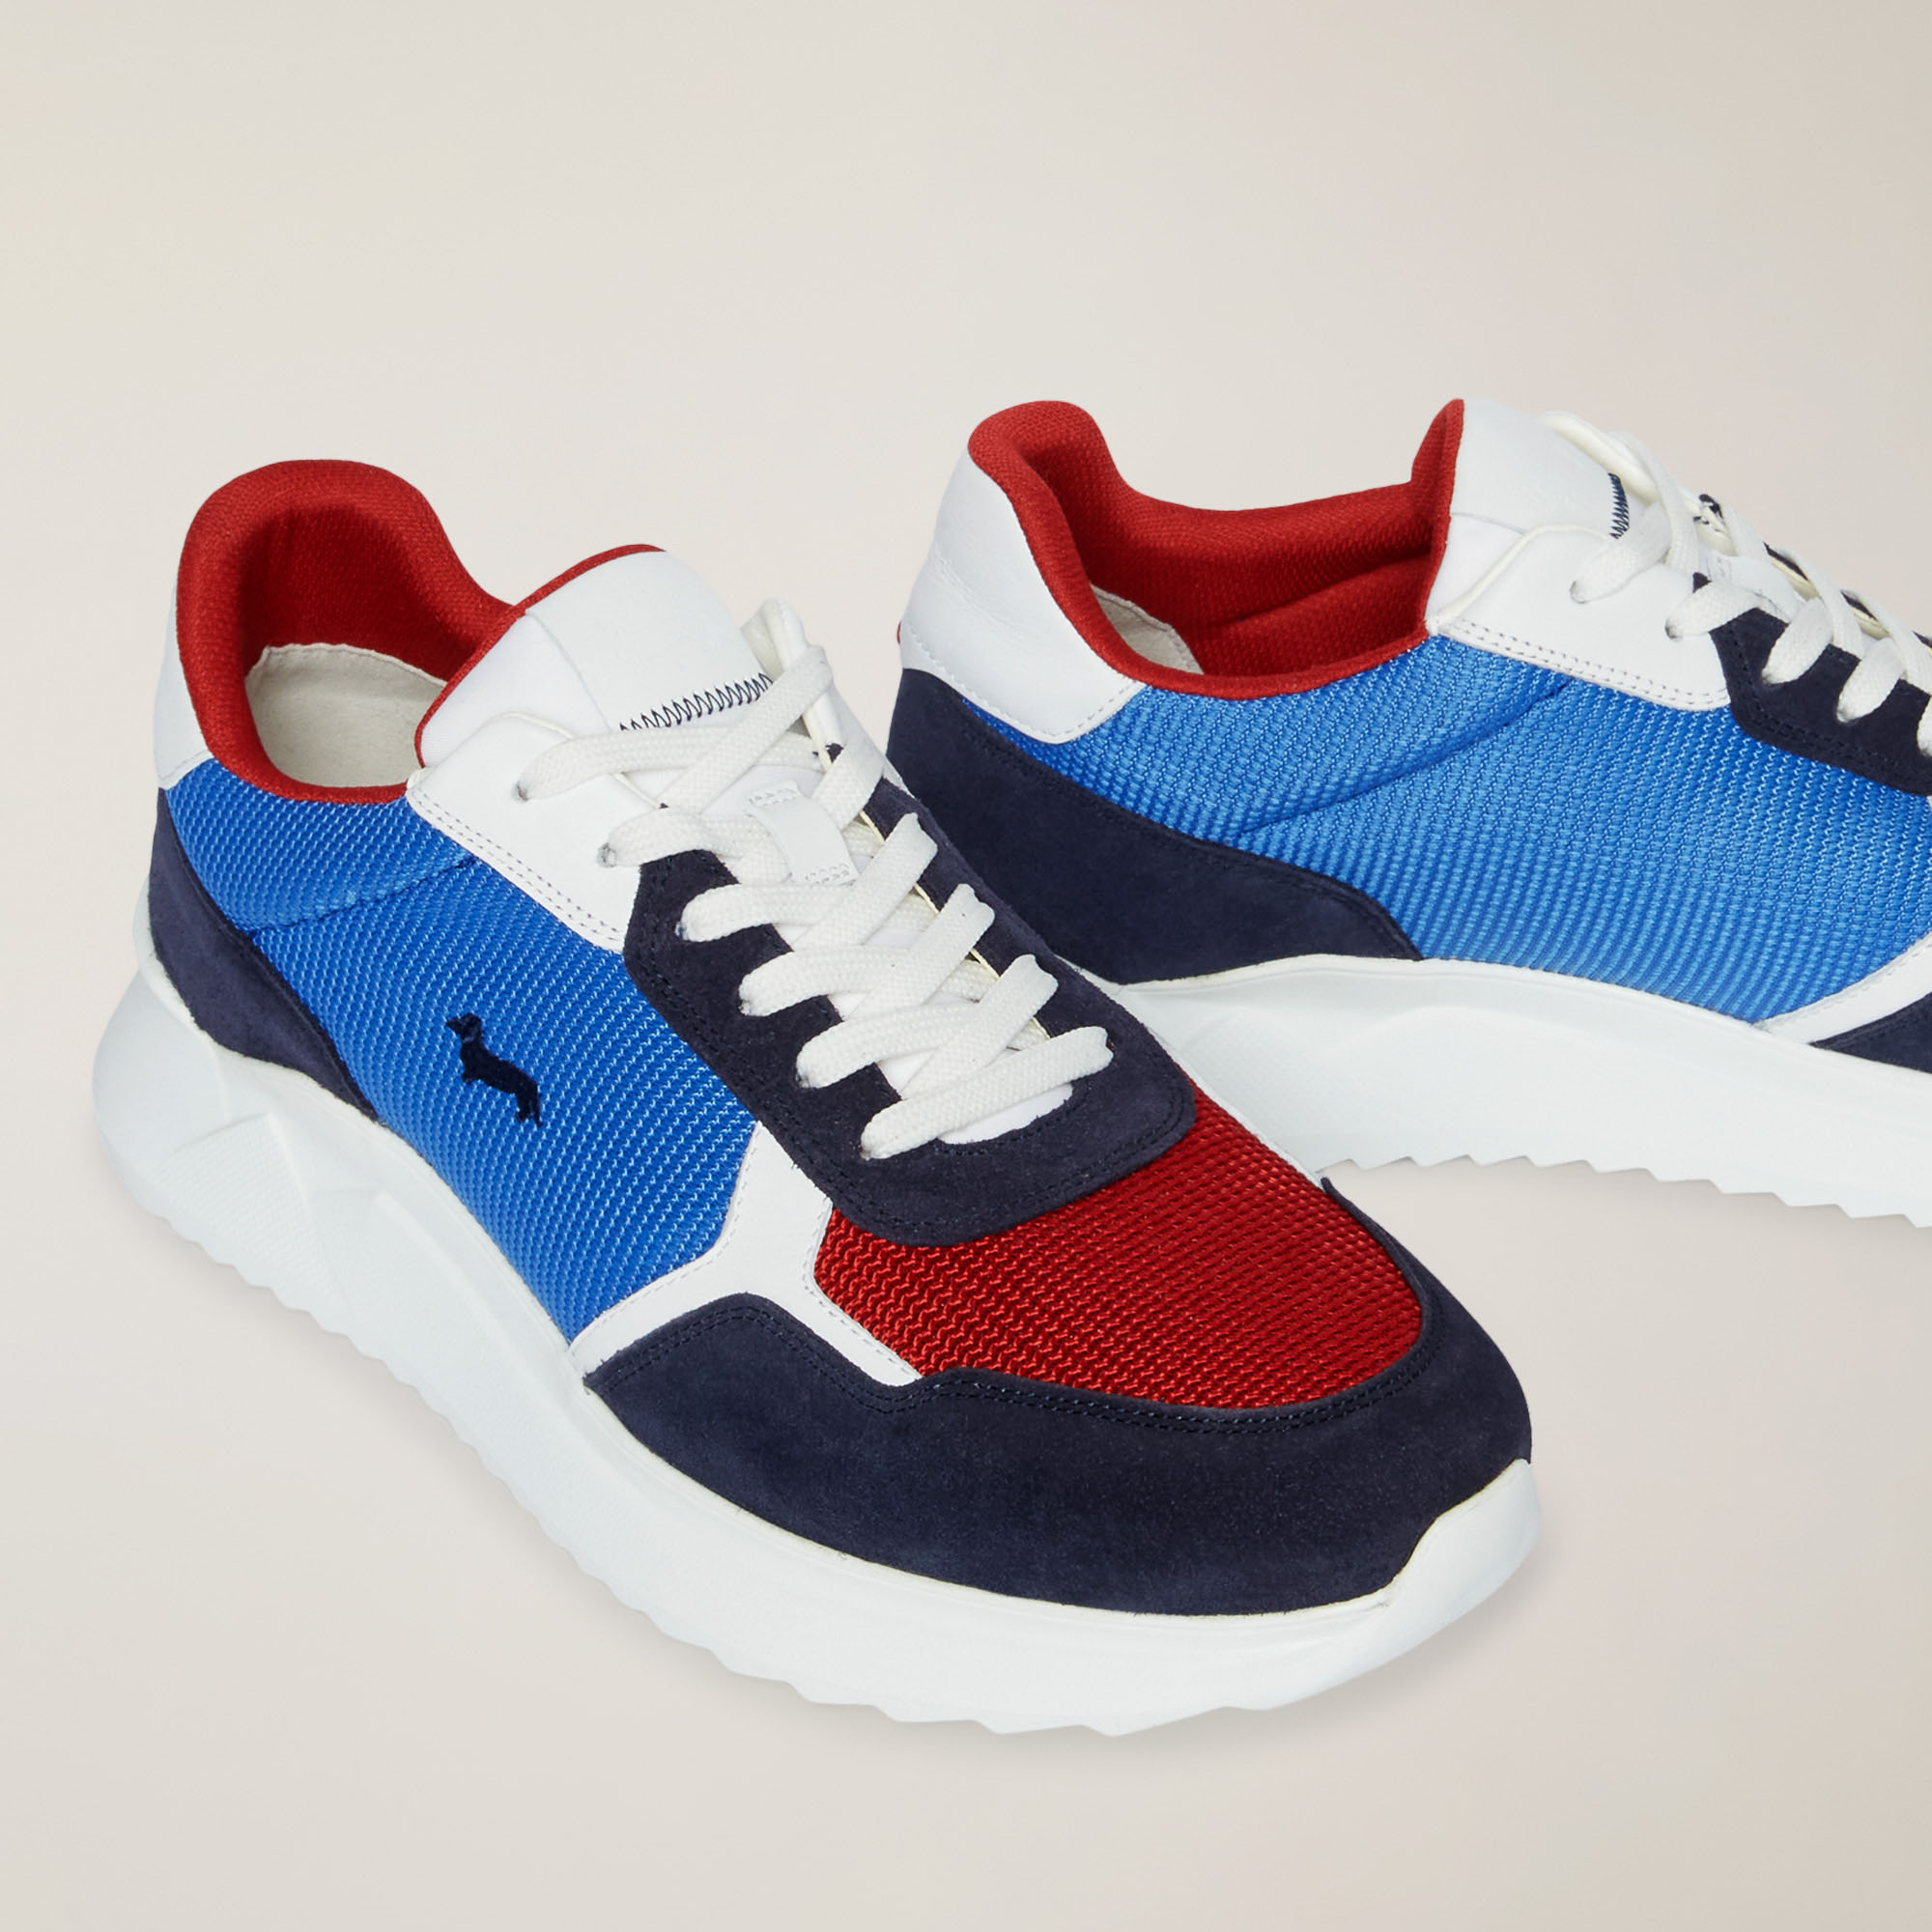 Mixed-Material Sneaker, Blue/Red, large image number 3